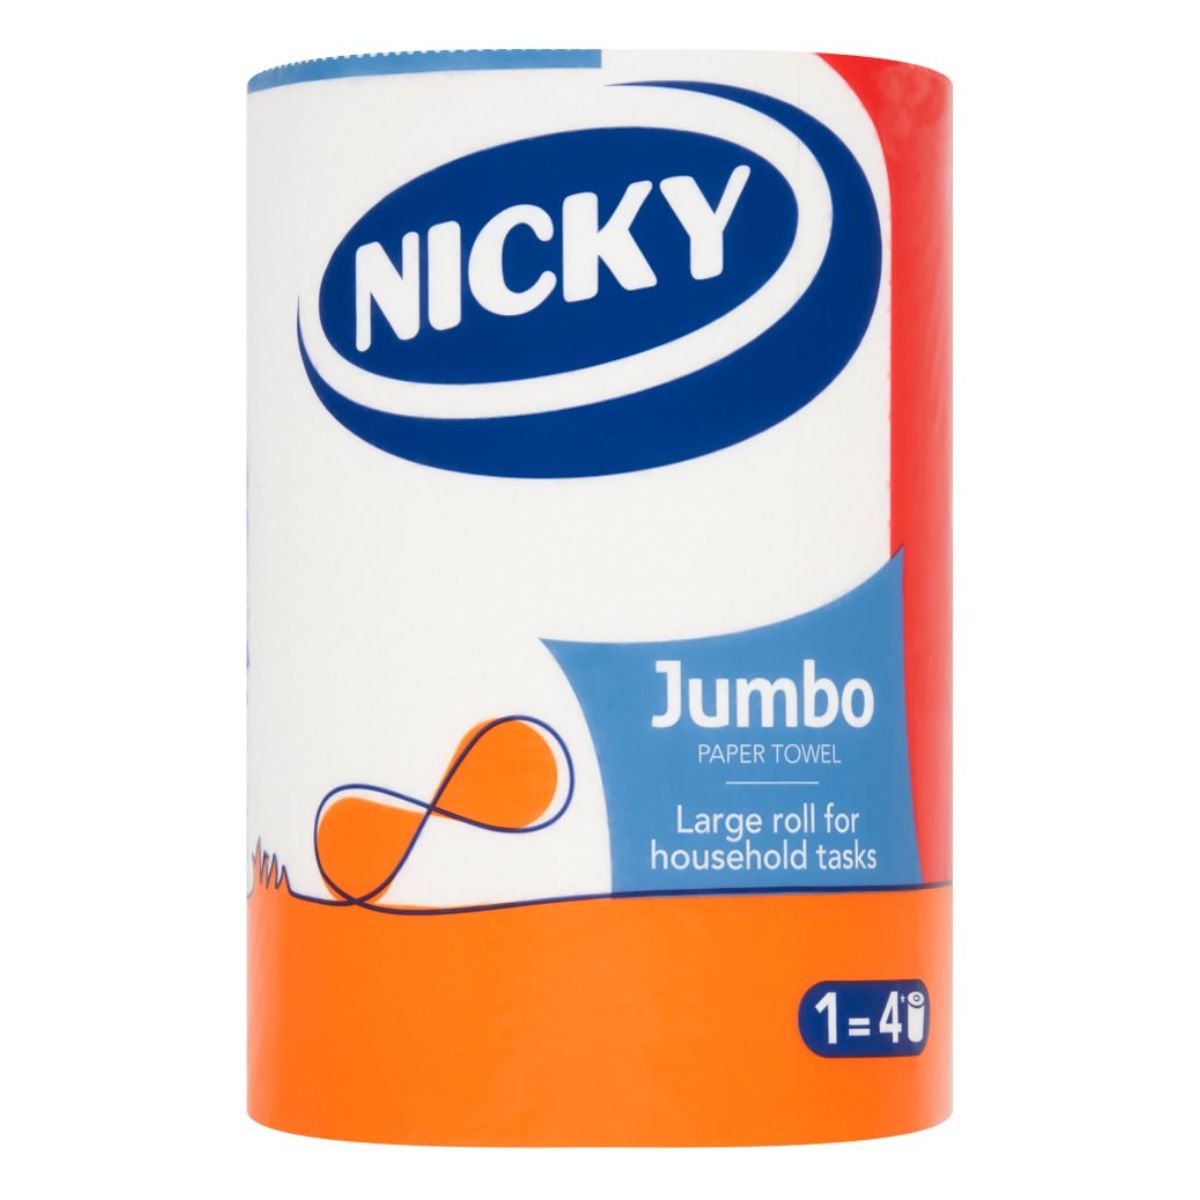 Nicky - Jumbo Paper Towel - 1pcs on a white background.